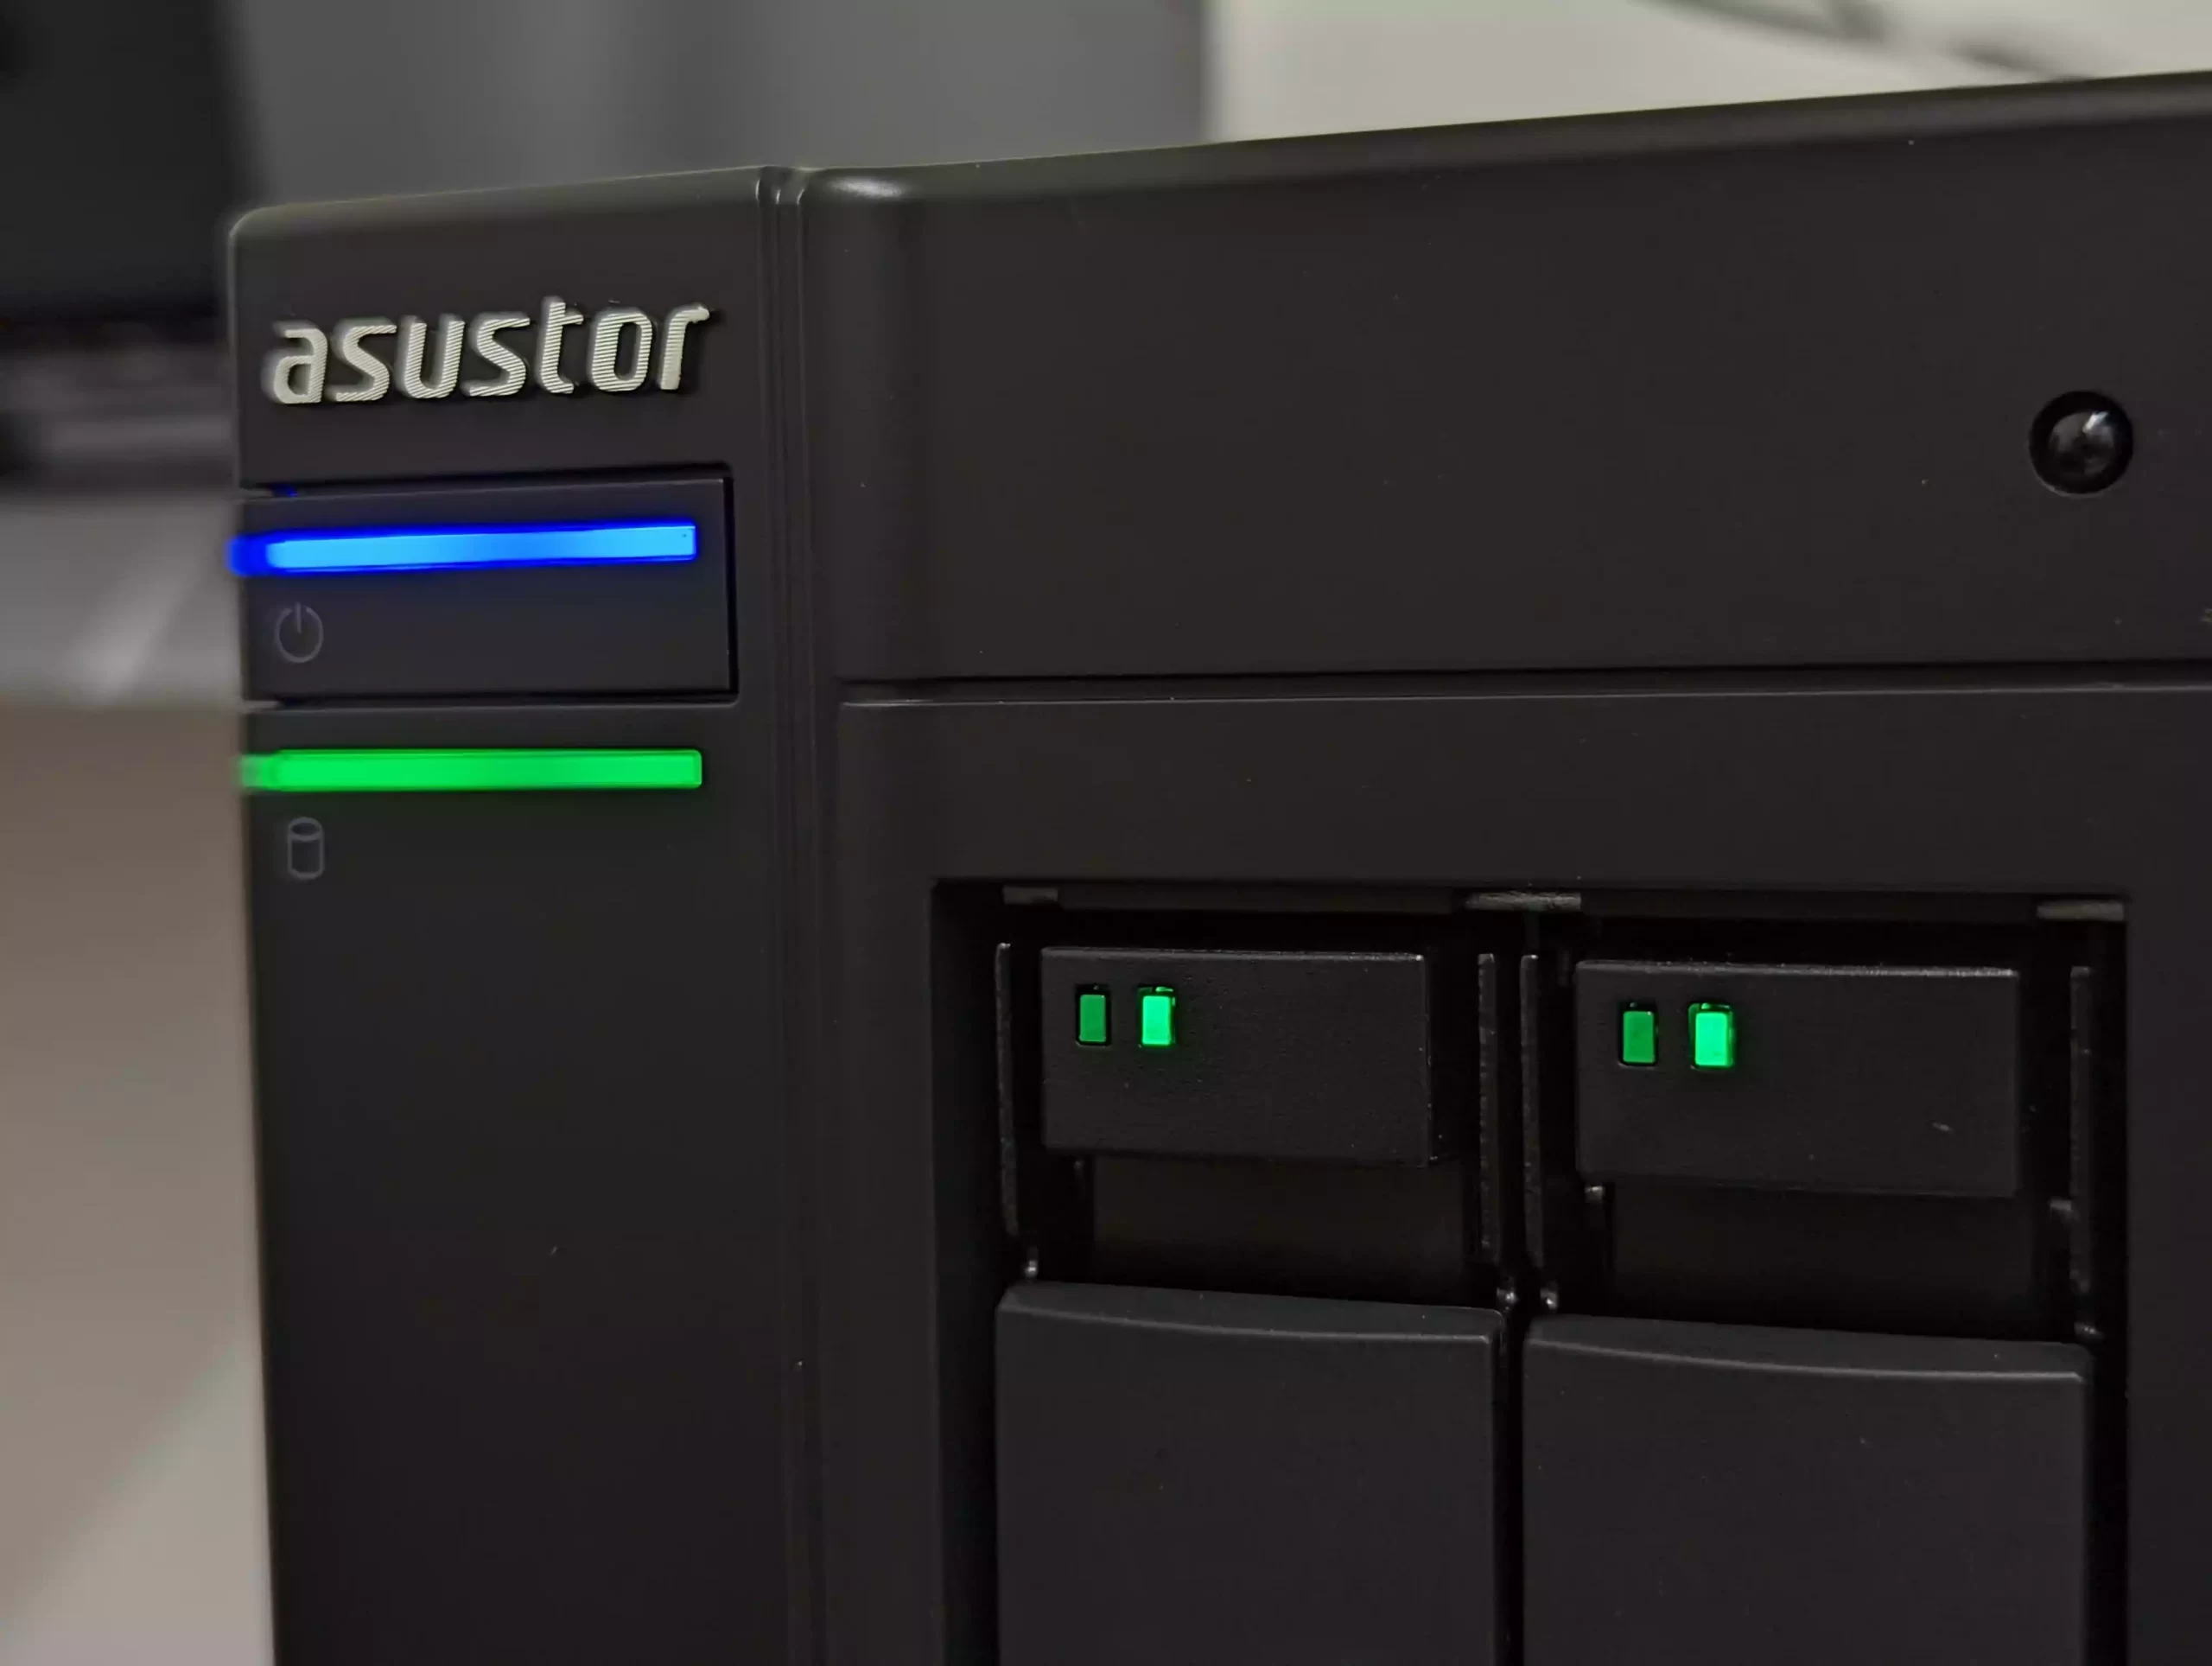 Using SSD Caching on your ASUSTOR NAS - ASUSTOR NAS